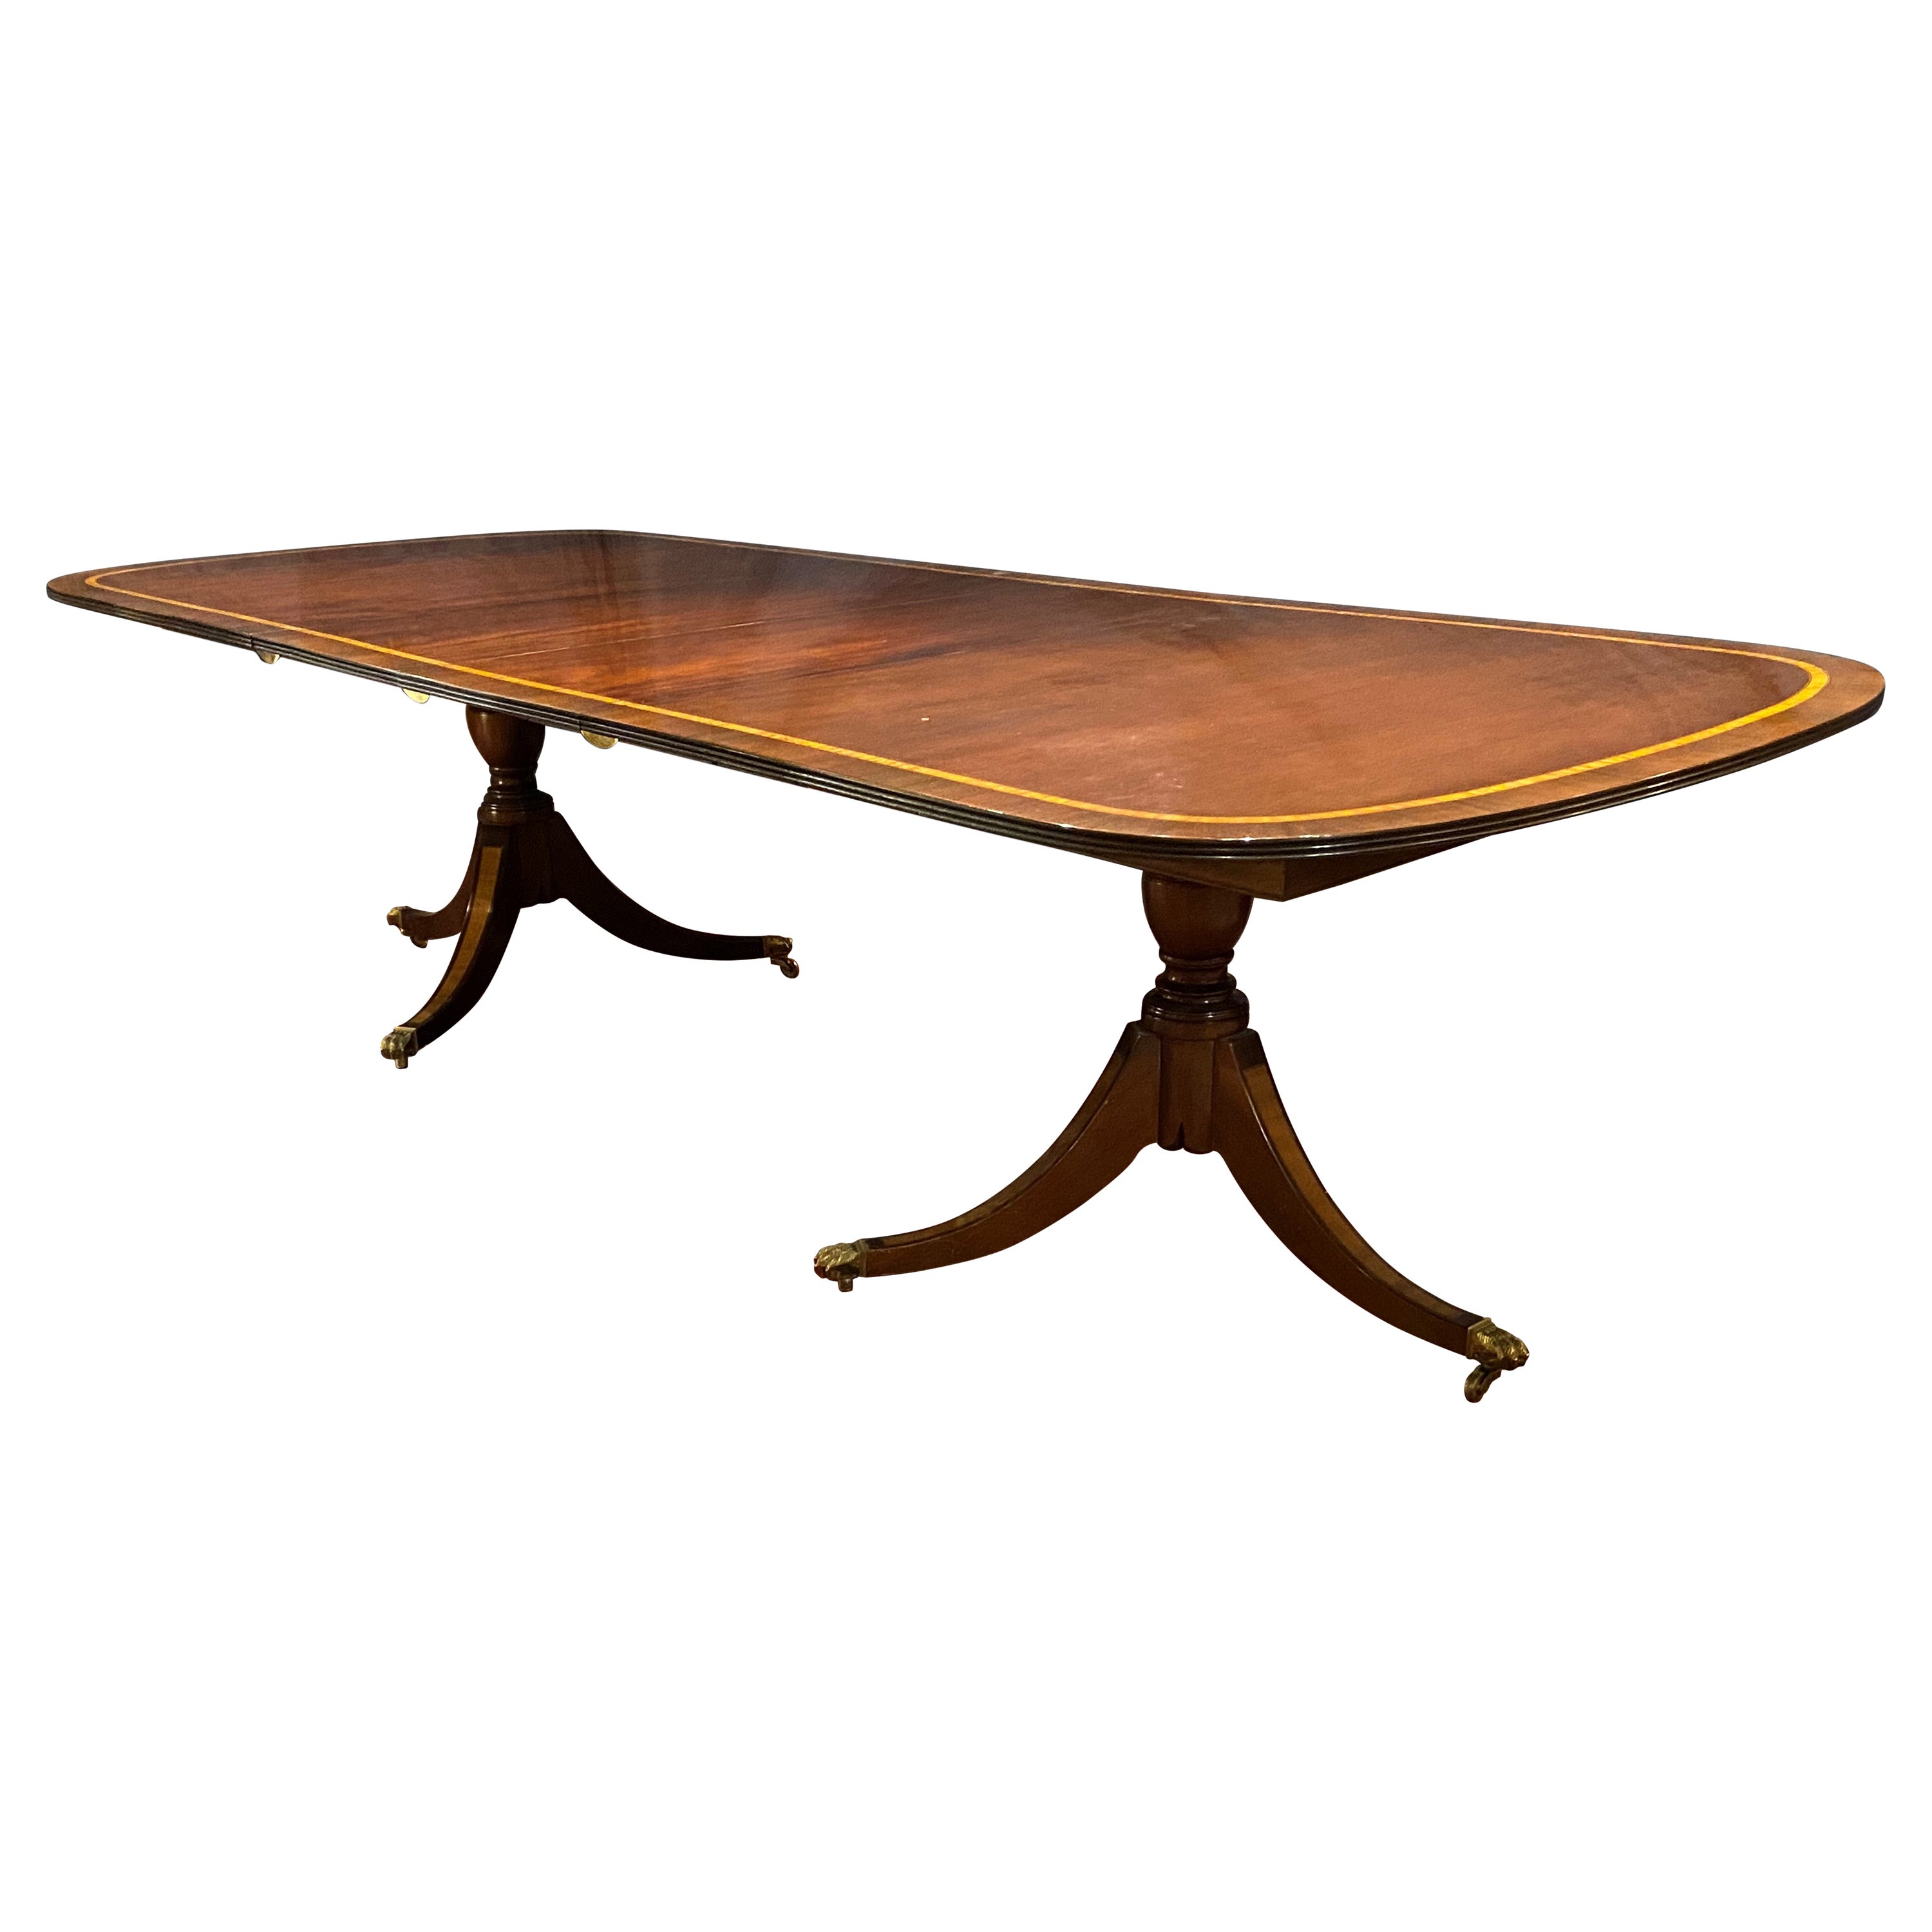 Inlaid Mahogany Banded Double Pedestal Dining Table with Two Leaves